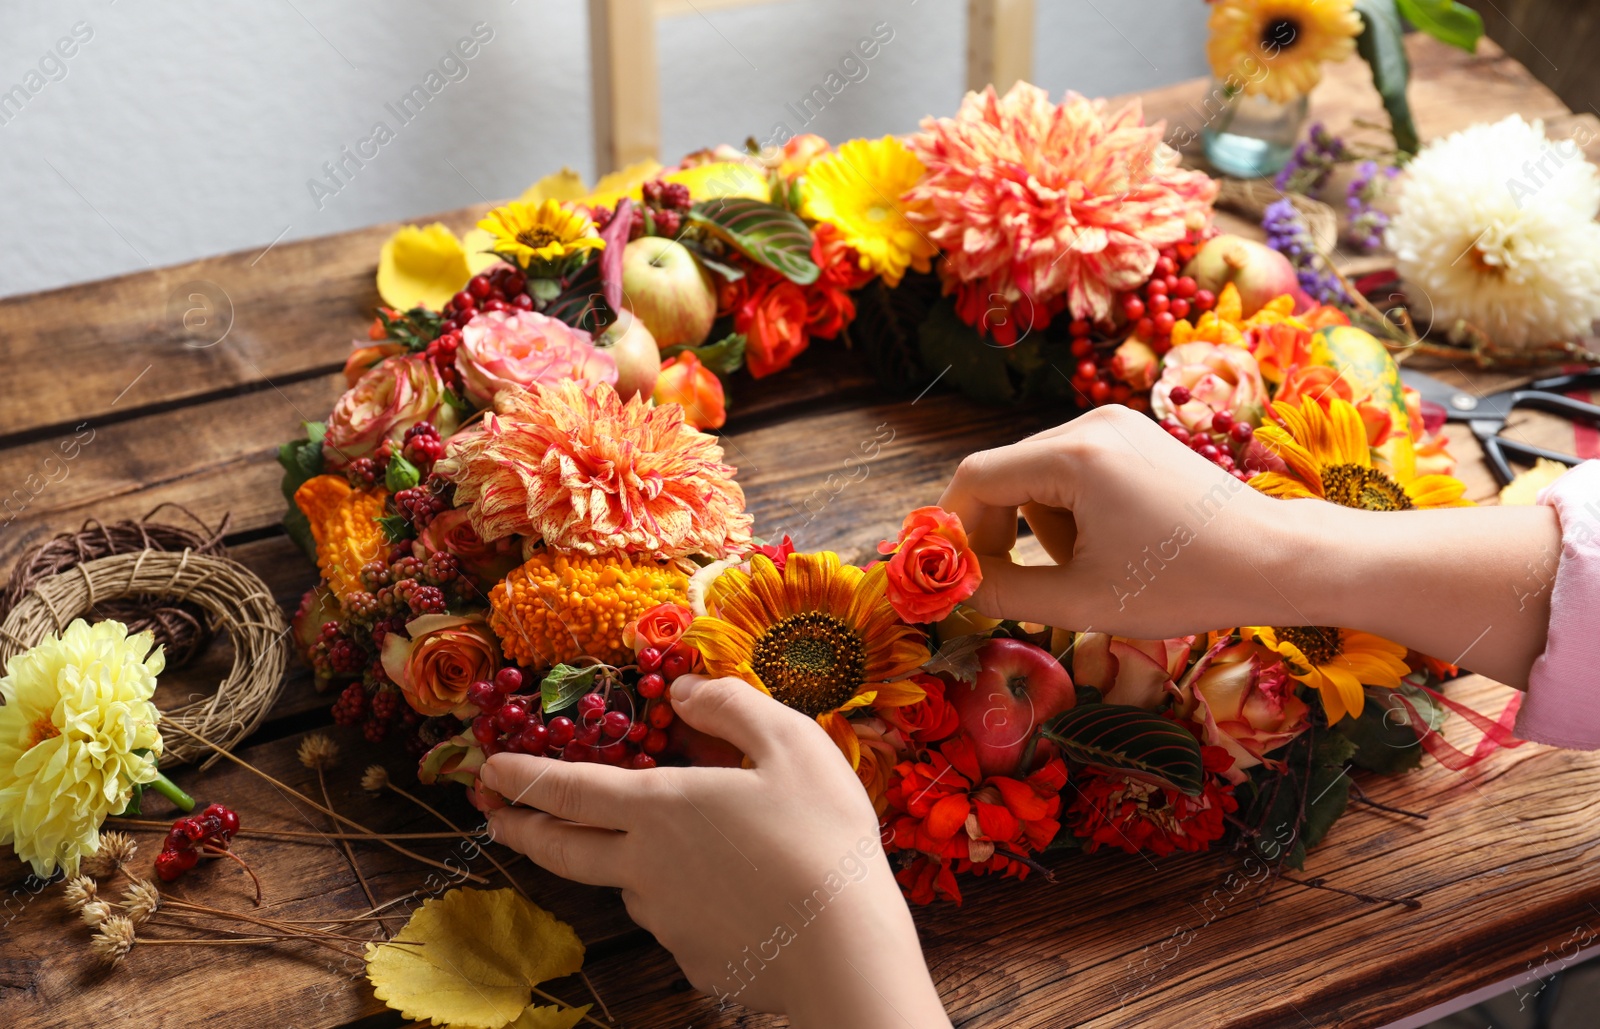 Photo of Florist making beautiful autumnal wreath with flowers and fruits at wooden table, closeup